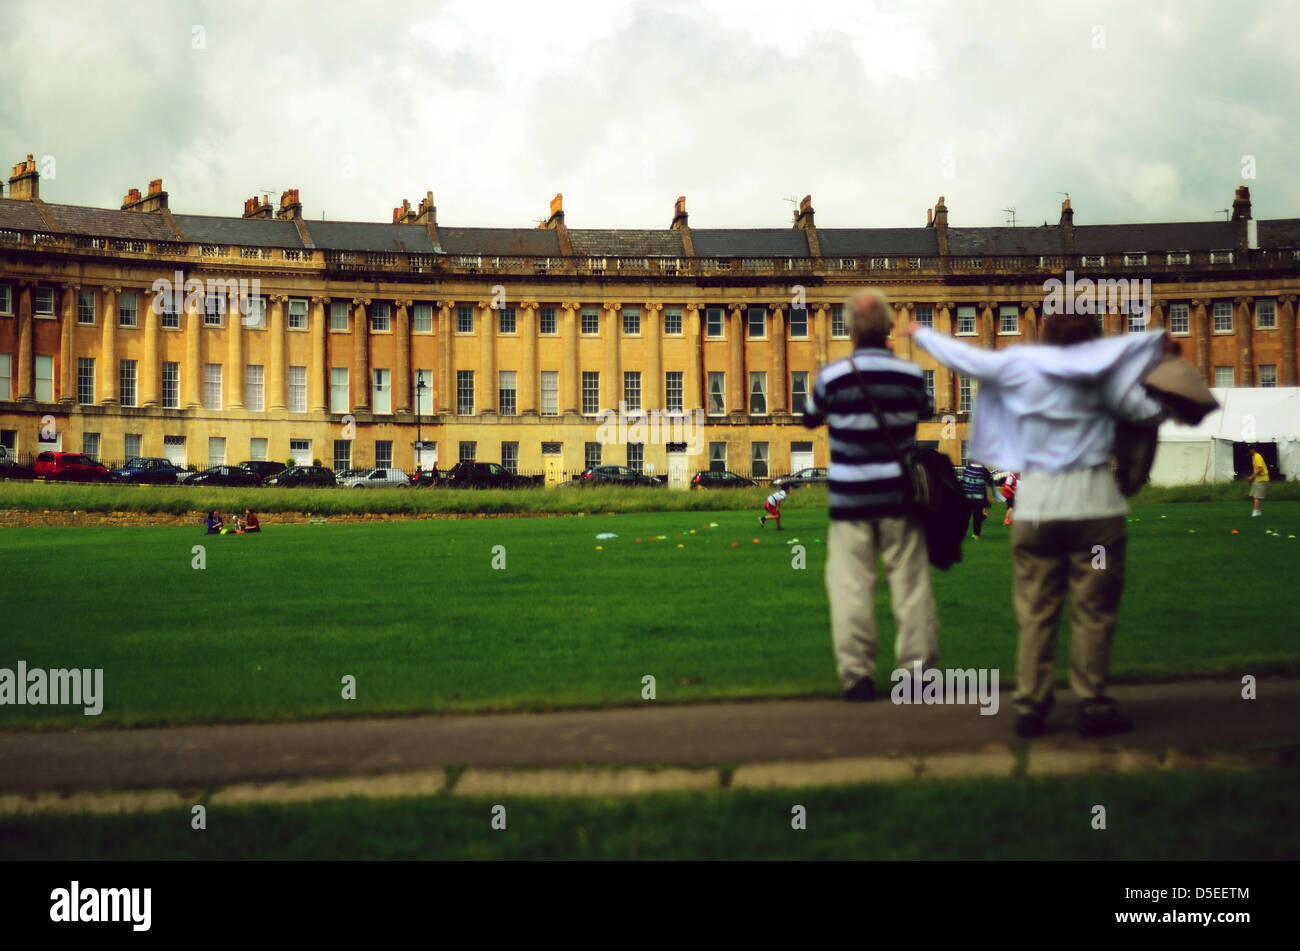 A photograph taken of two elderly people in a park in Bath, UK. Stock Photo